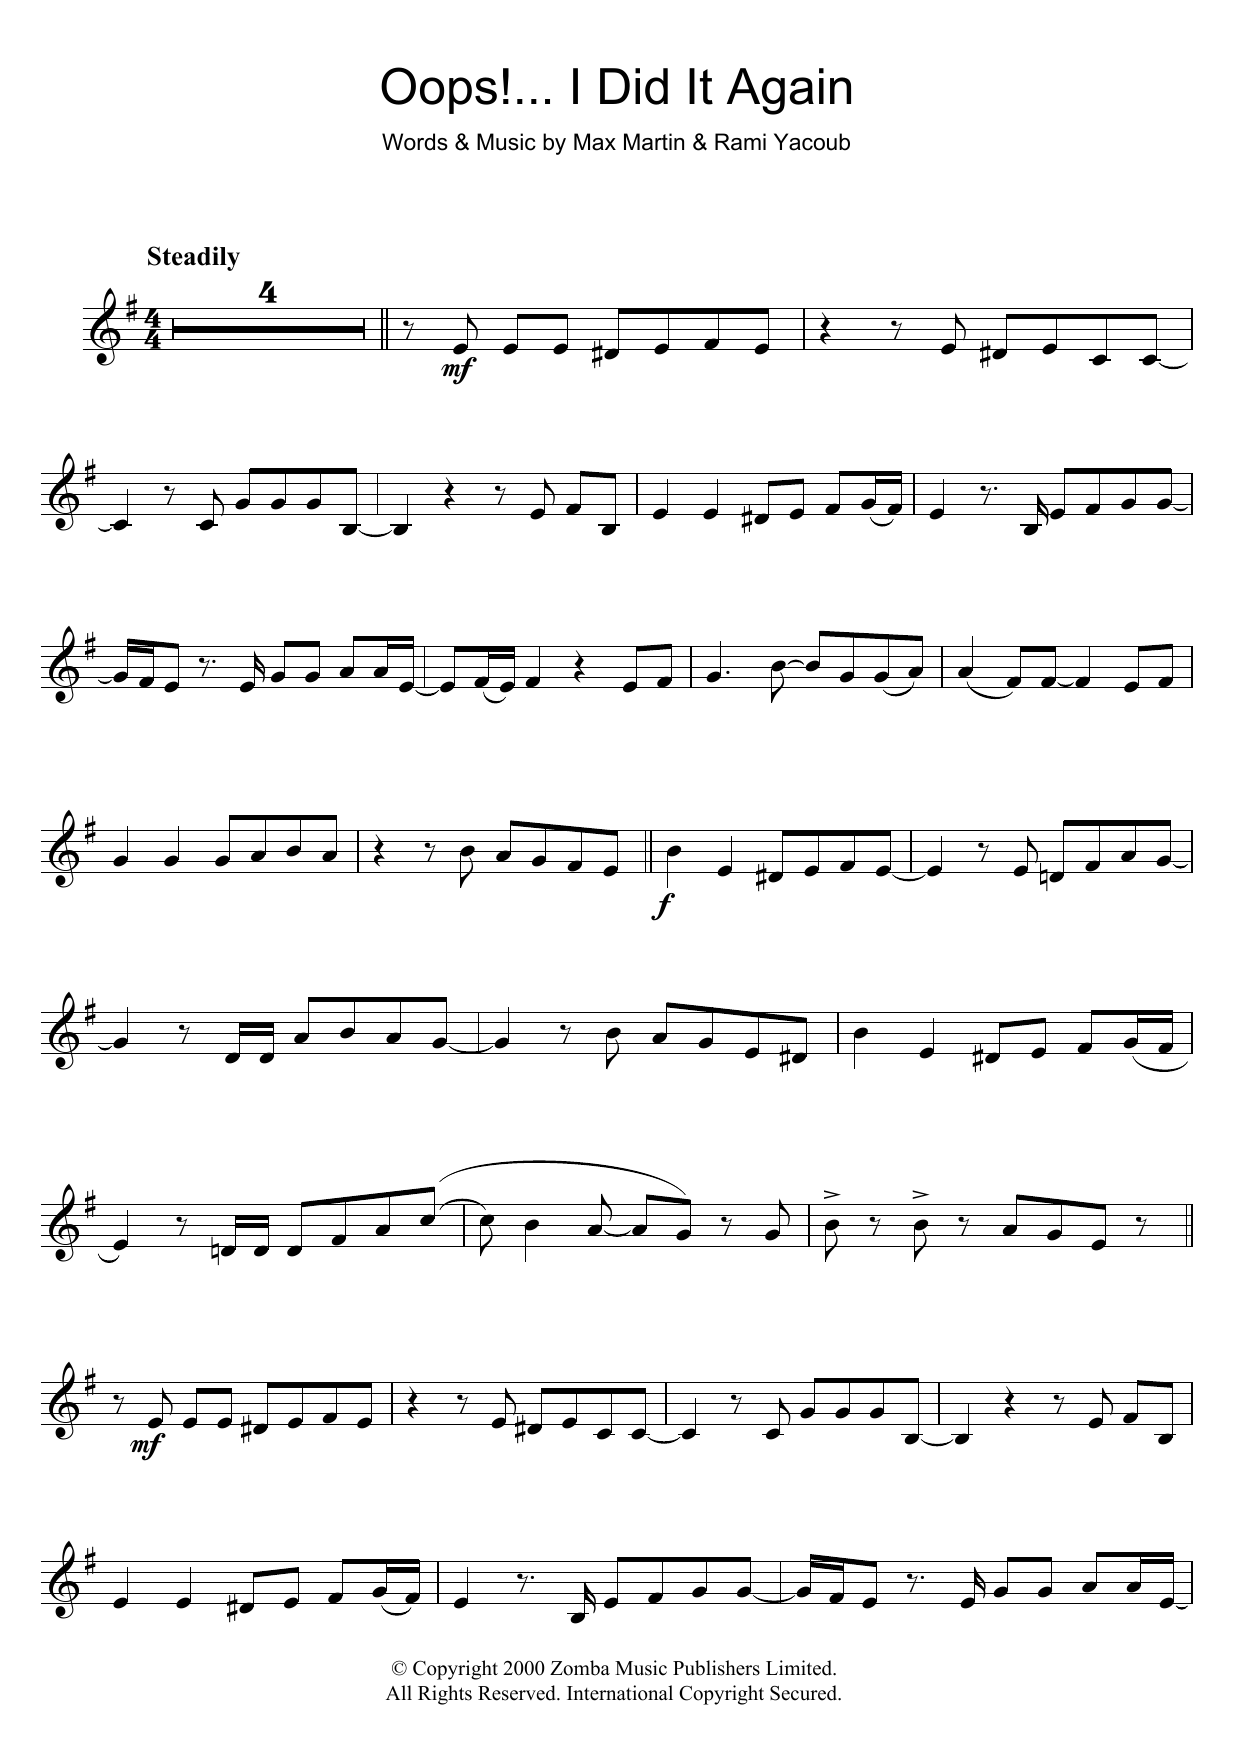 Download Britney Spears Oops! I Did It Again Sheet Music